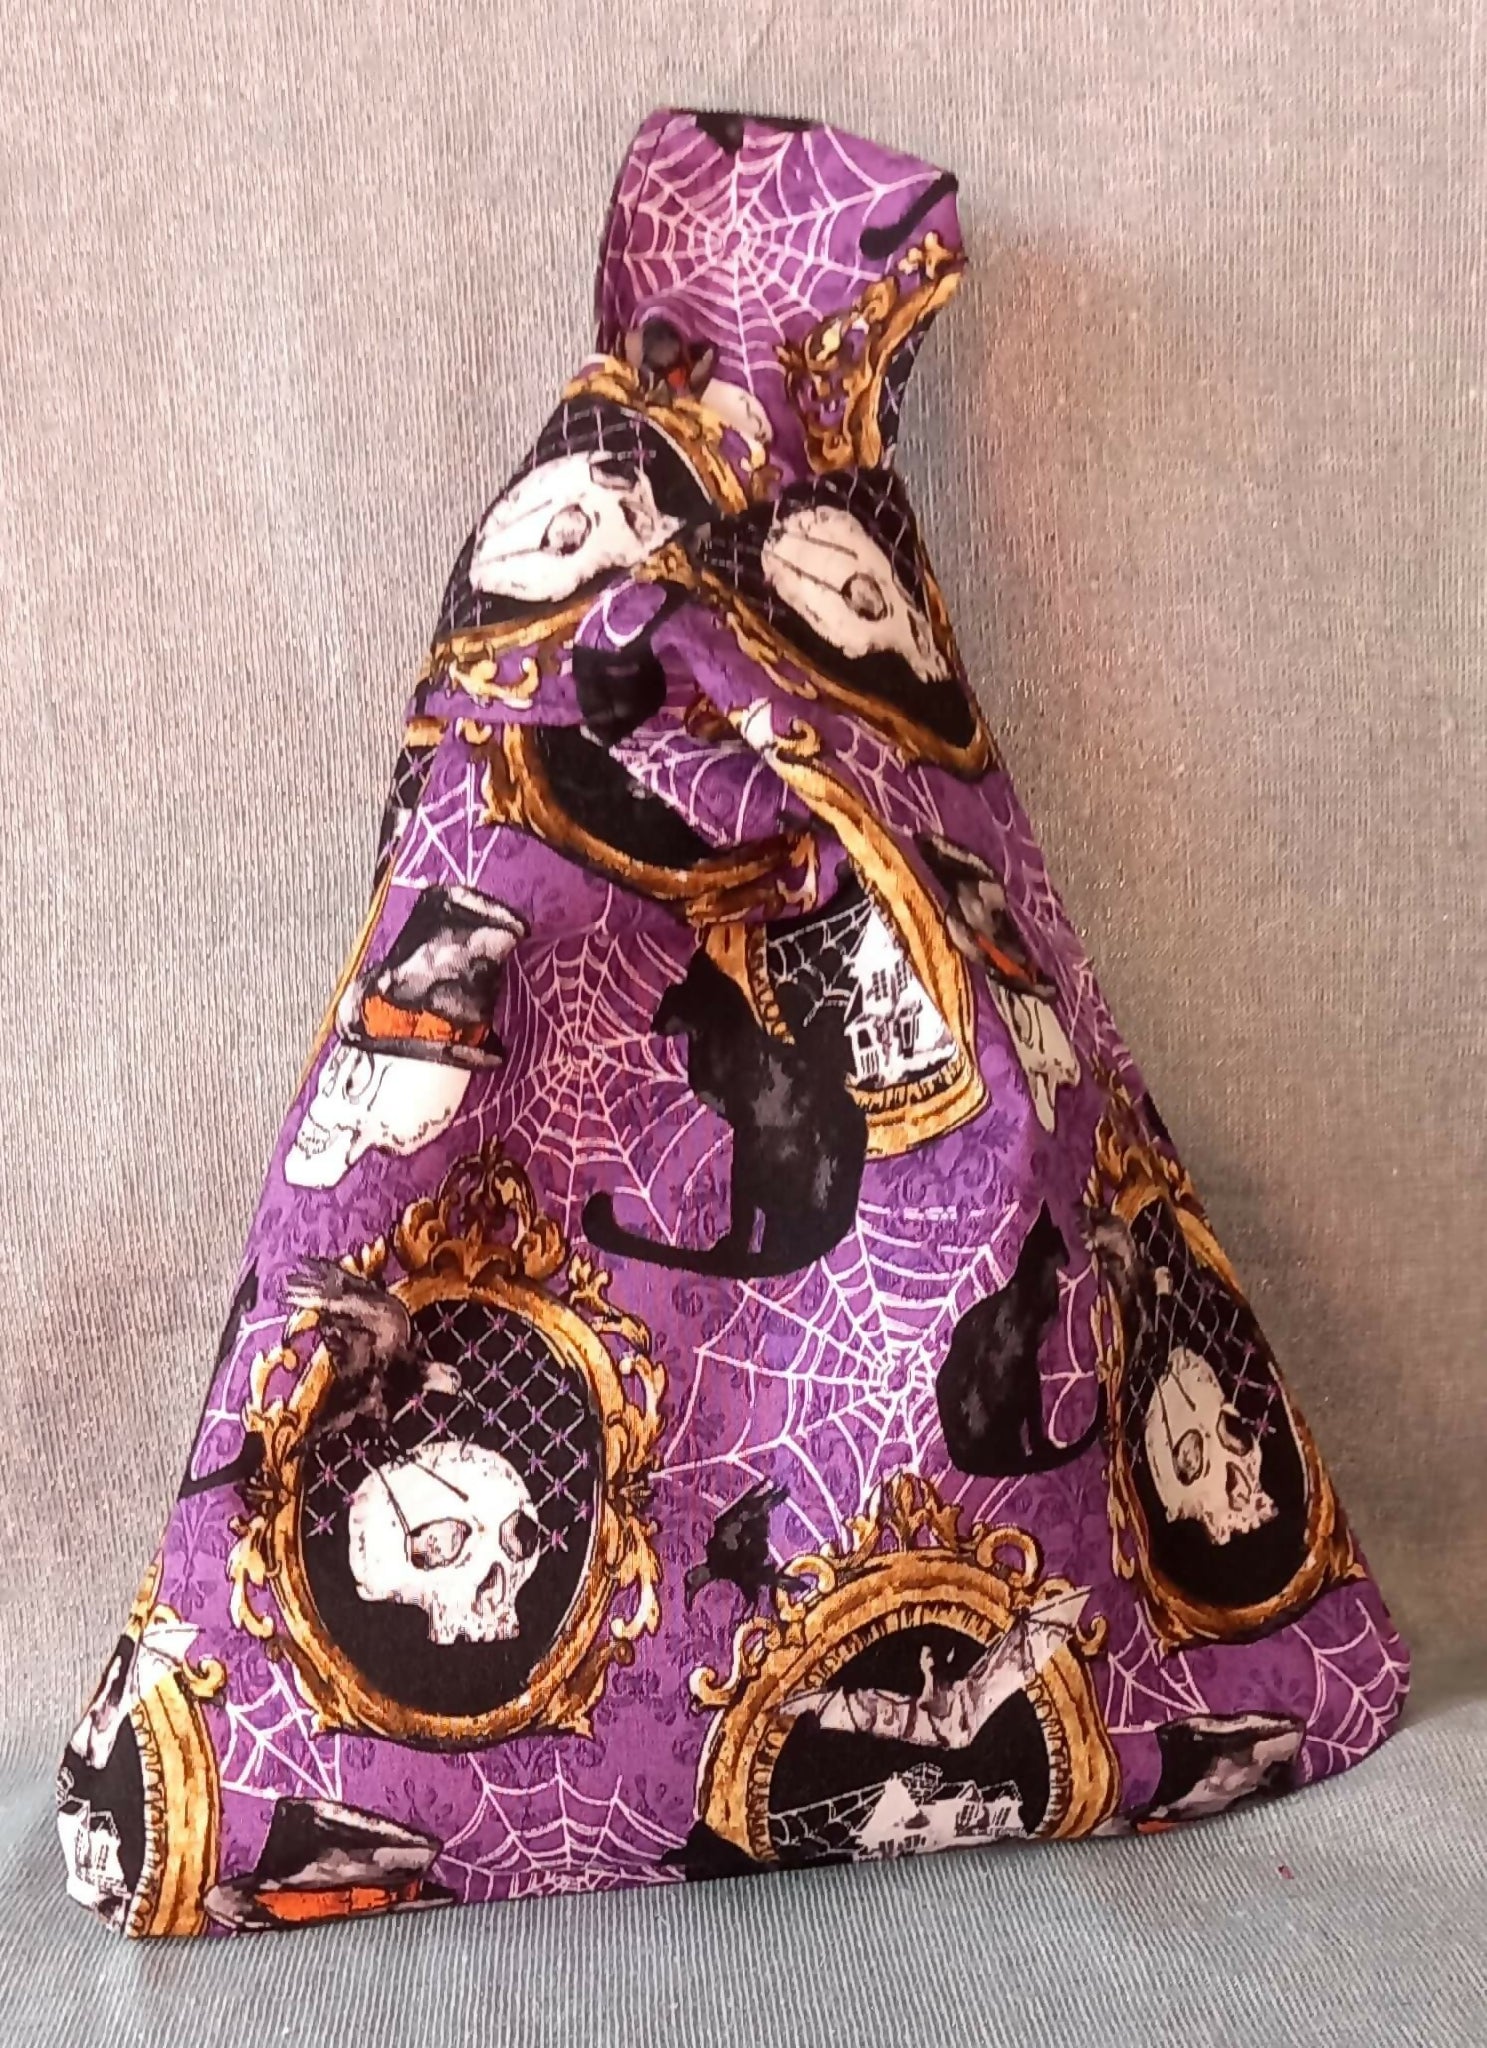 Japanese Knot Bag Small - Spooky Spider and Skull